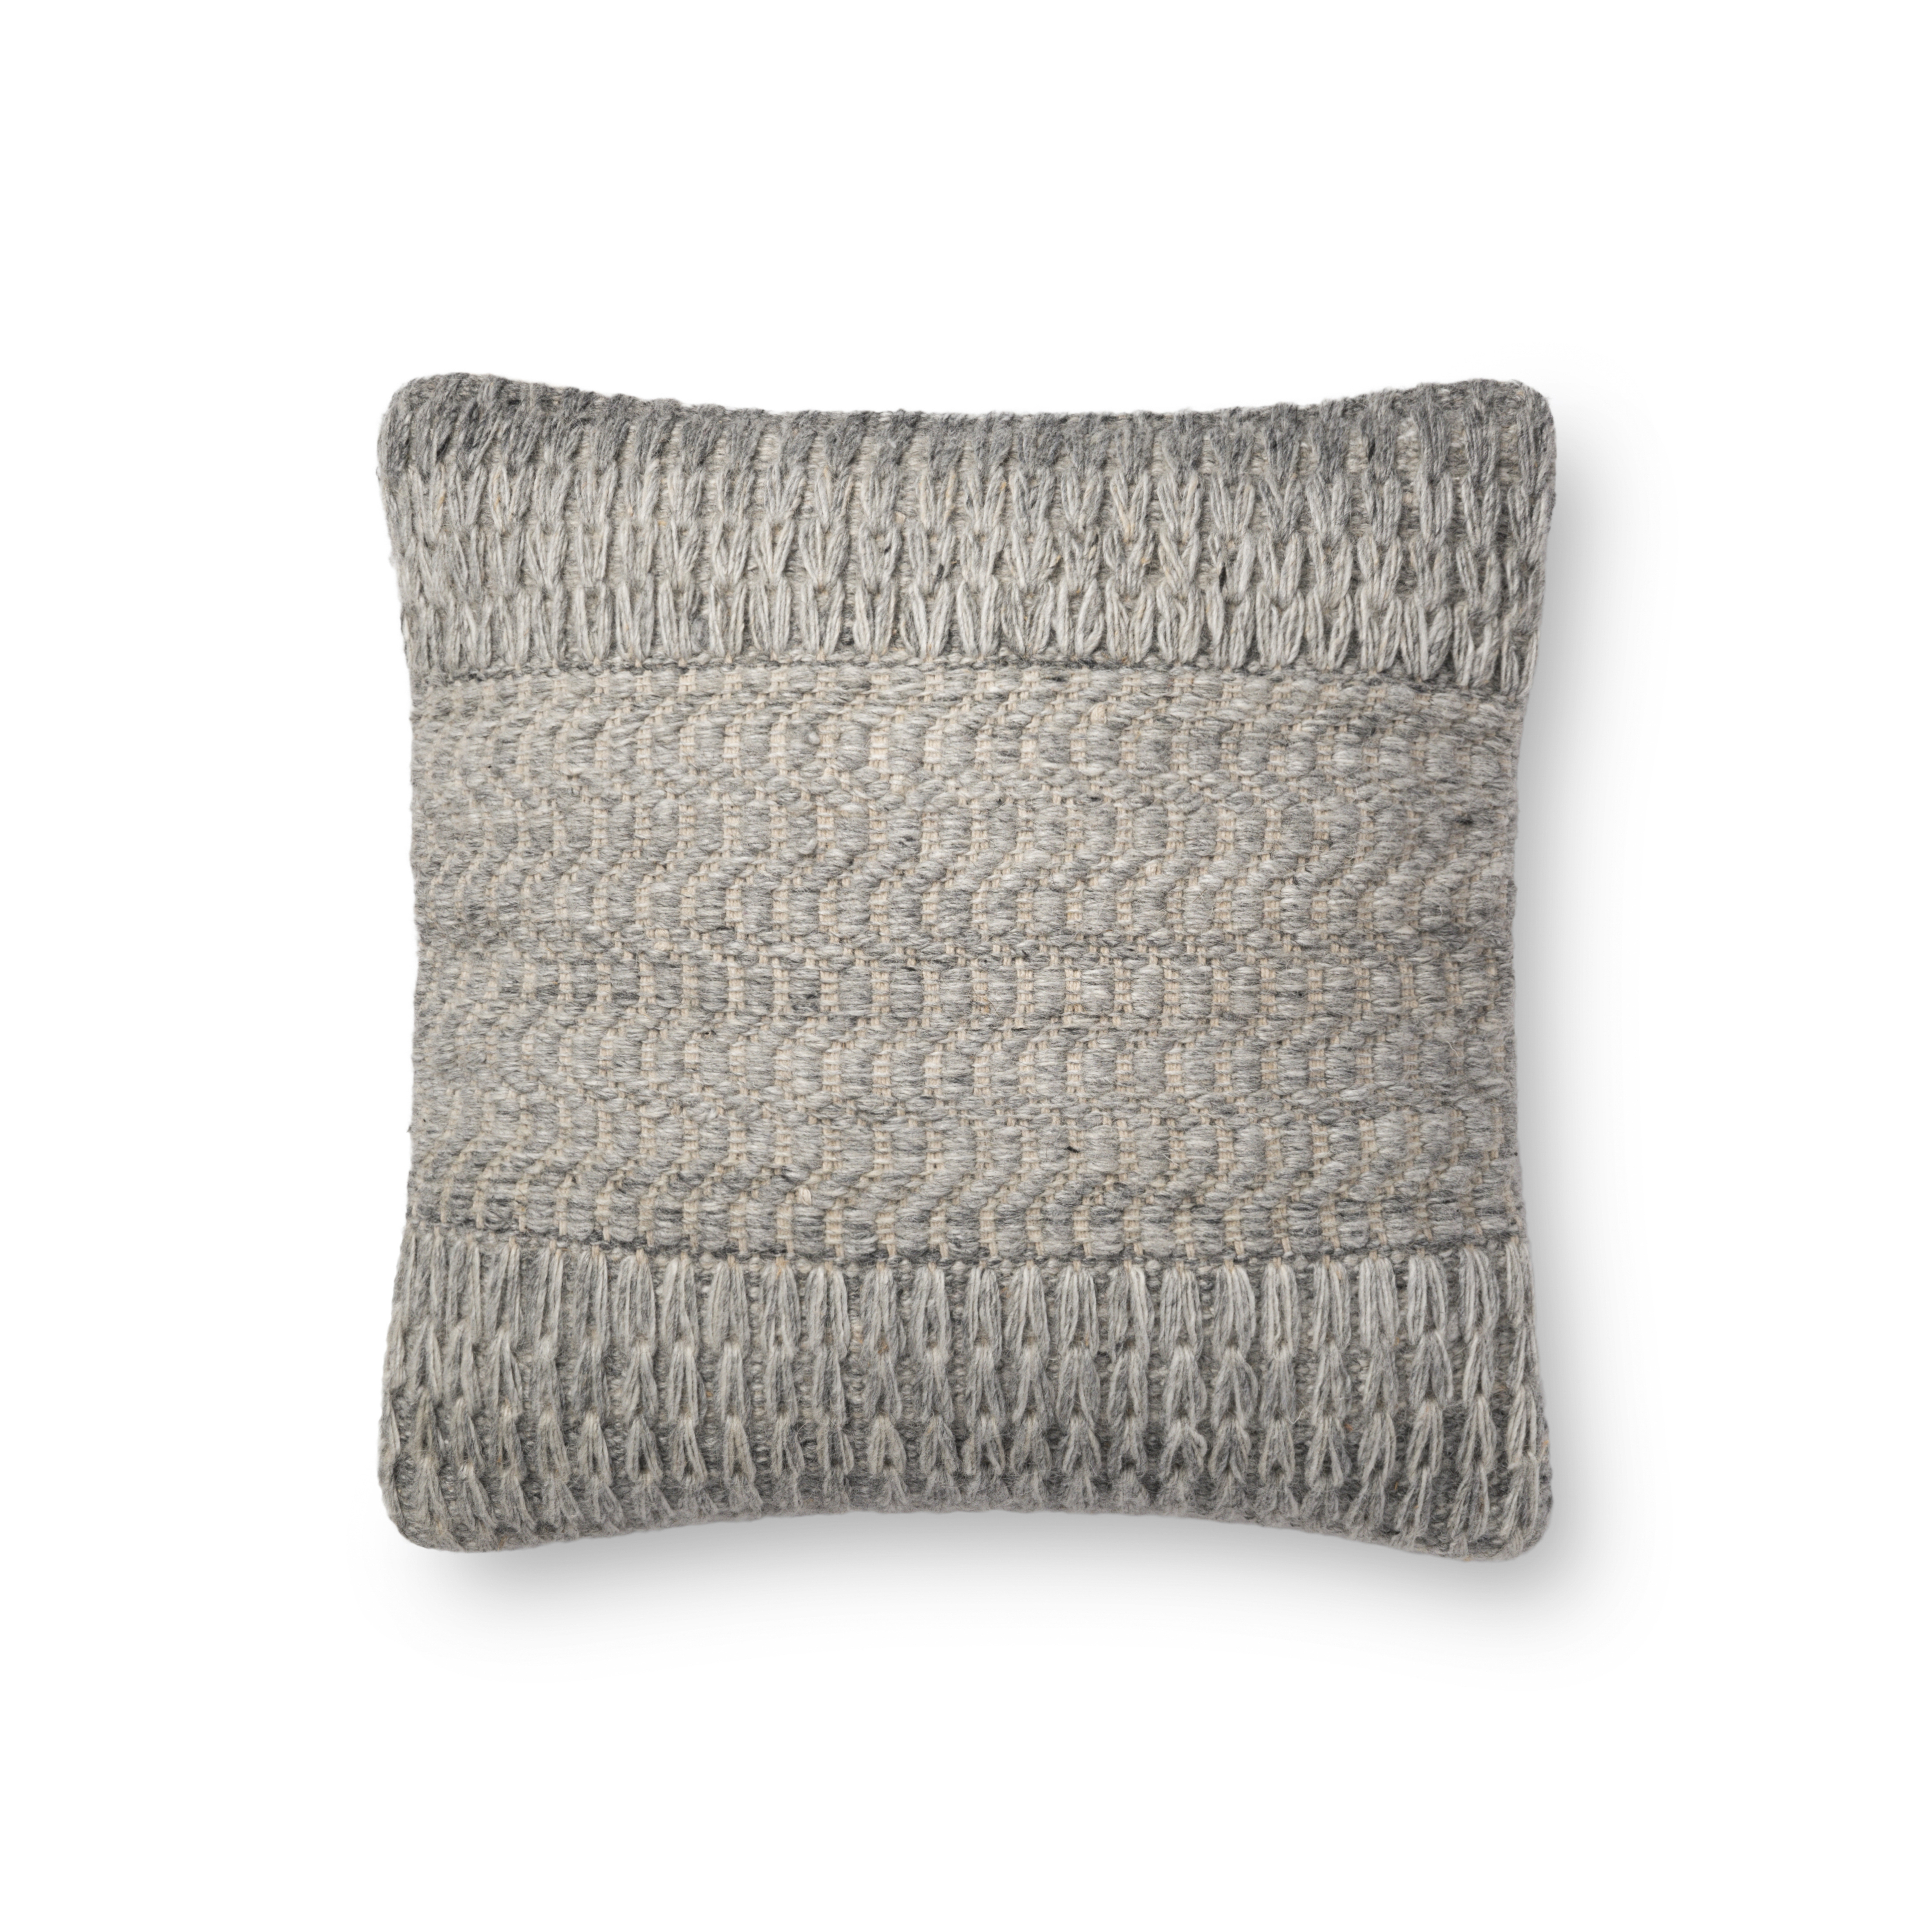 Loloi Pillows P0697 Grey 18" x 18" Cover Only - Loloi Rugs